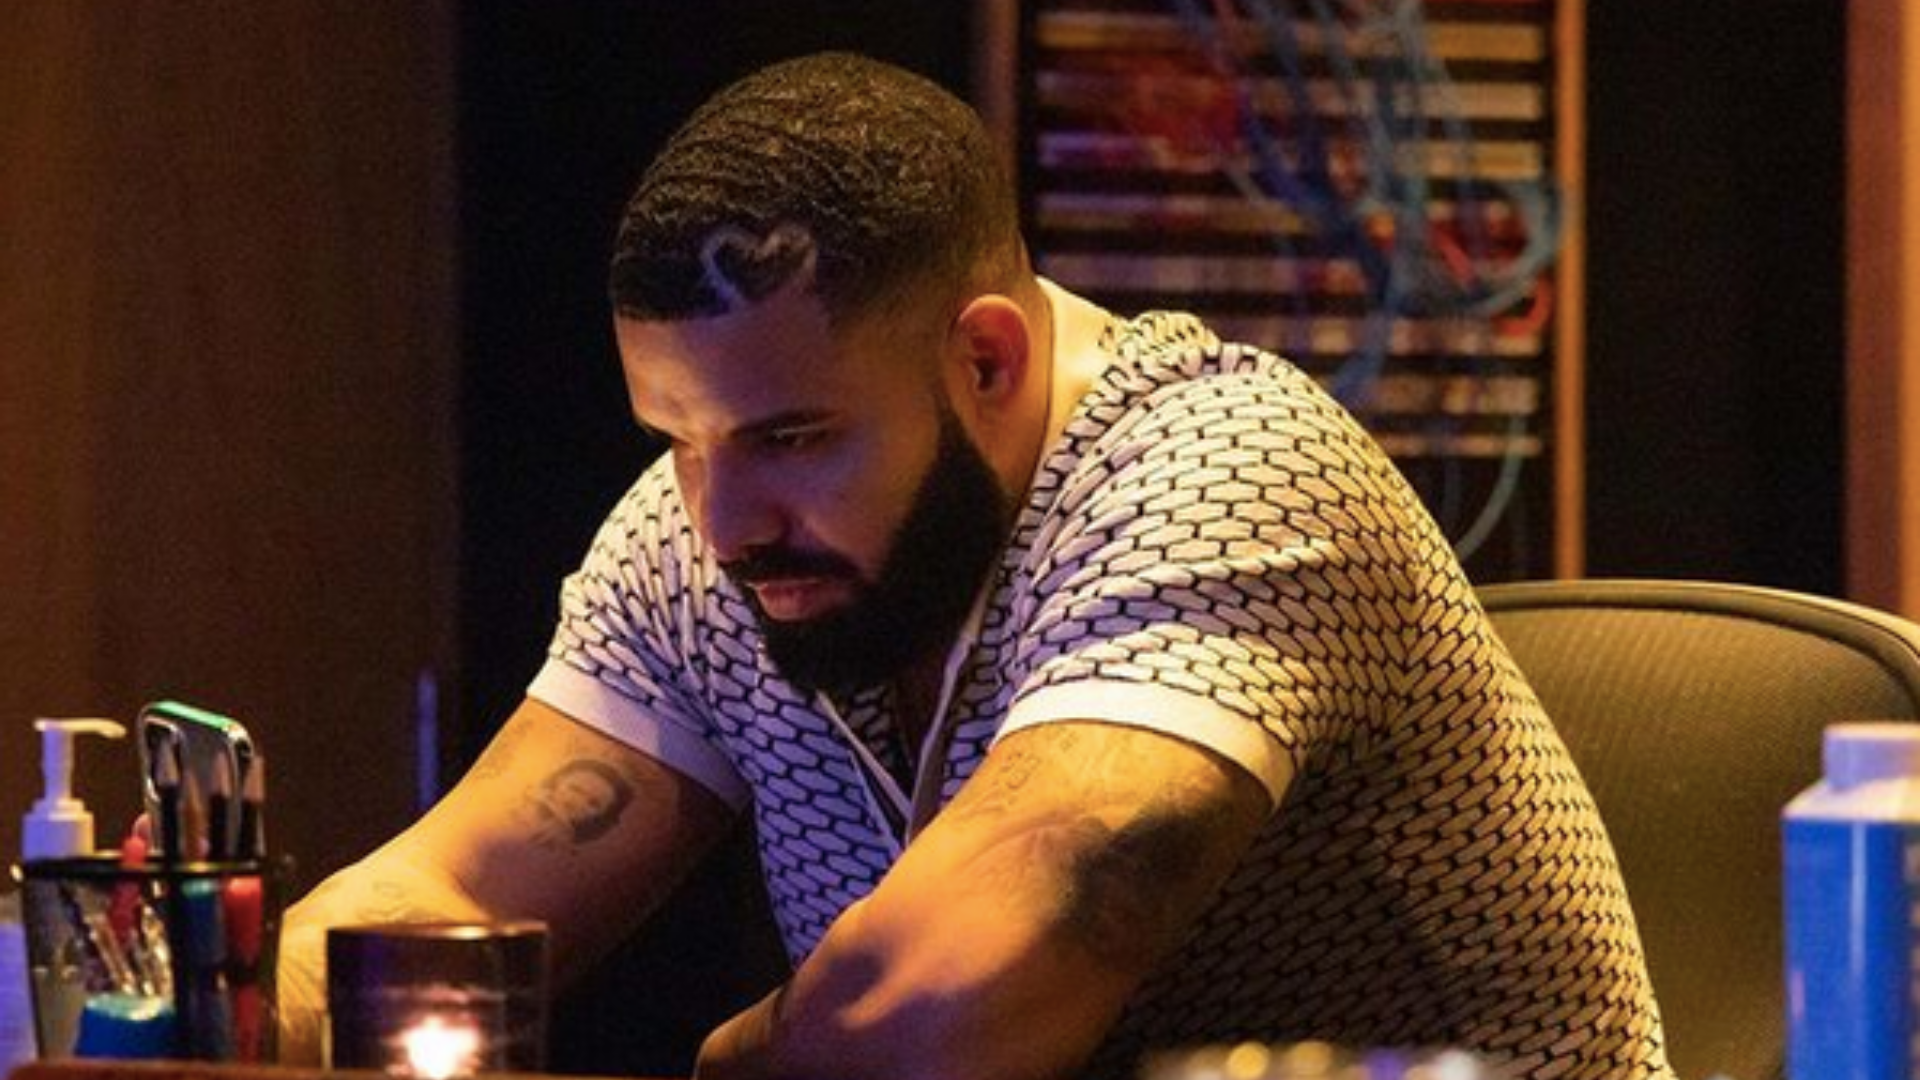 Drake Pays Tribute to Virgil Abloh With New Tattoo